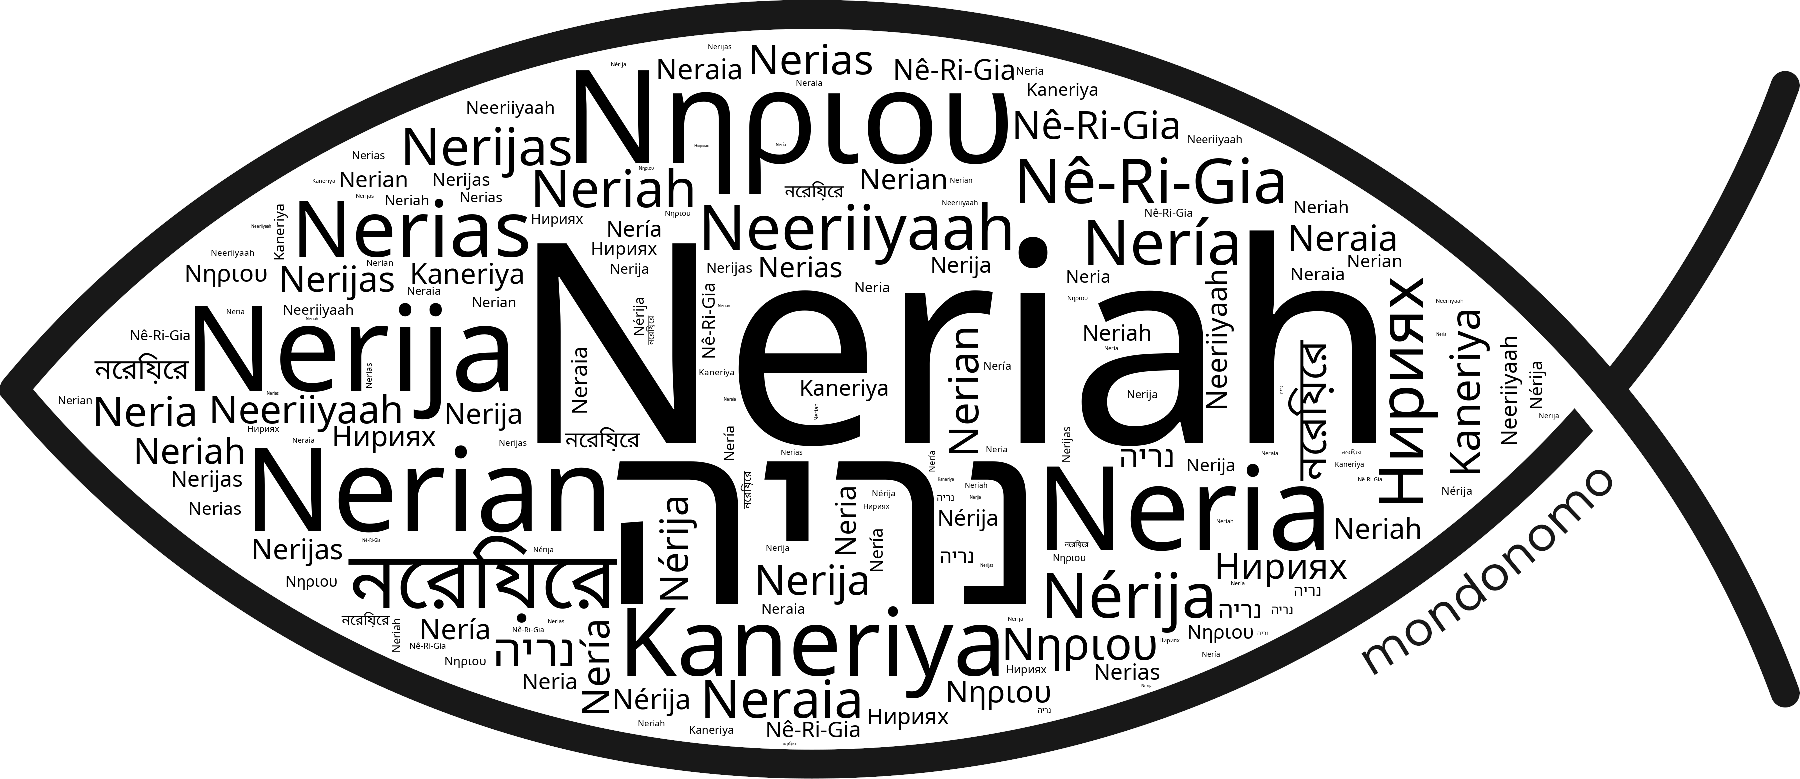 Name Neriah in the world's Bibles